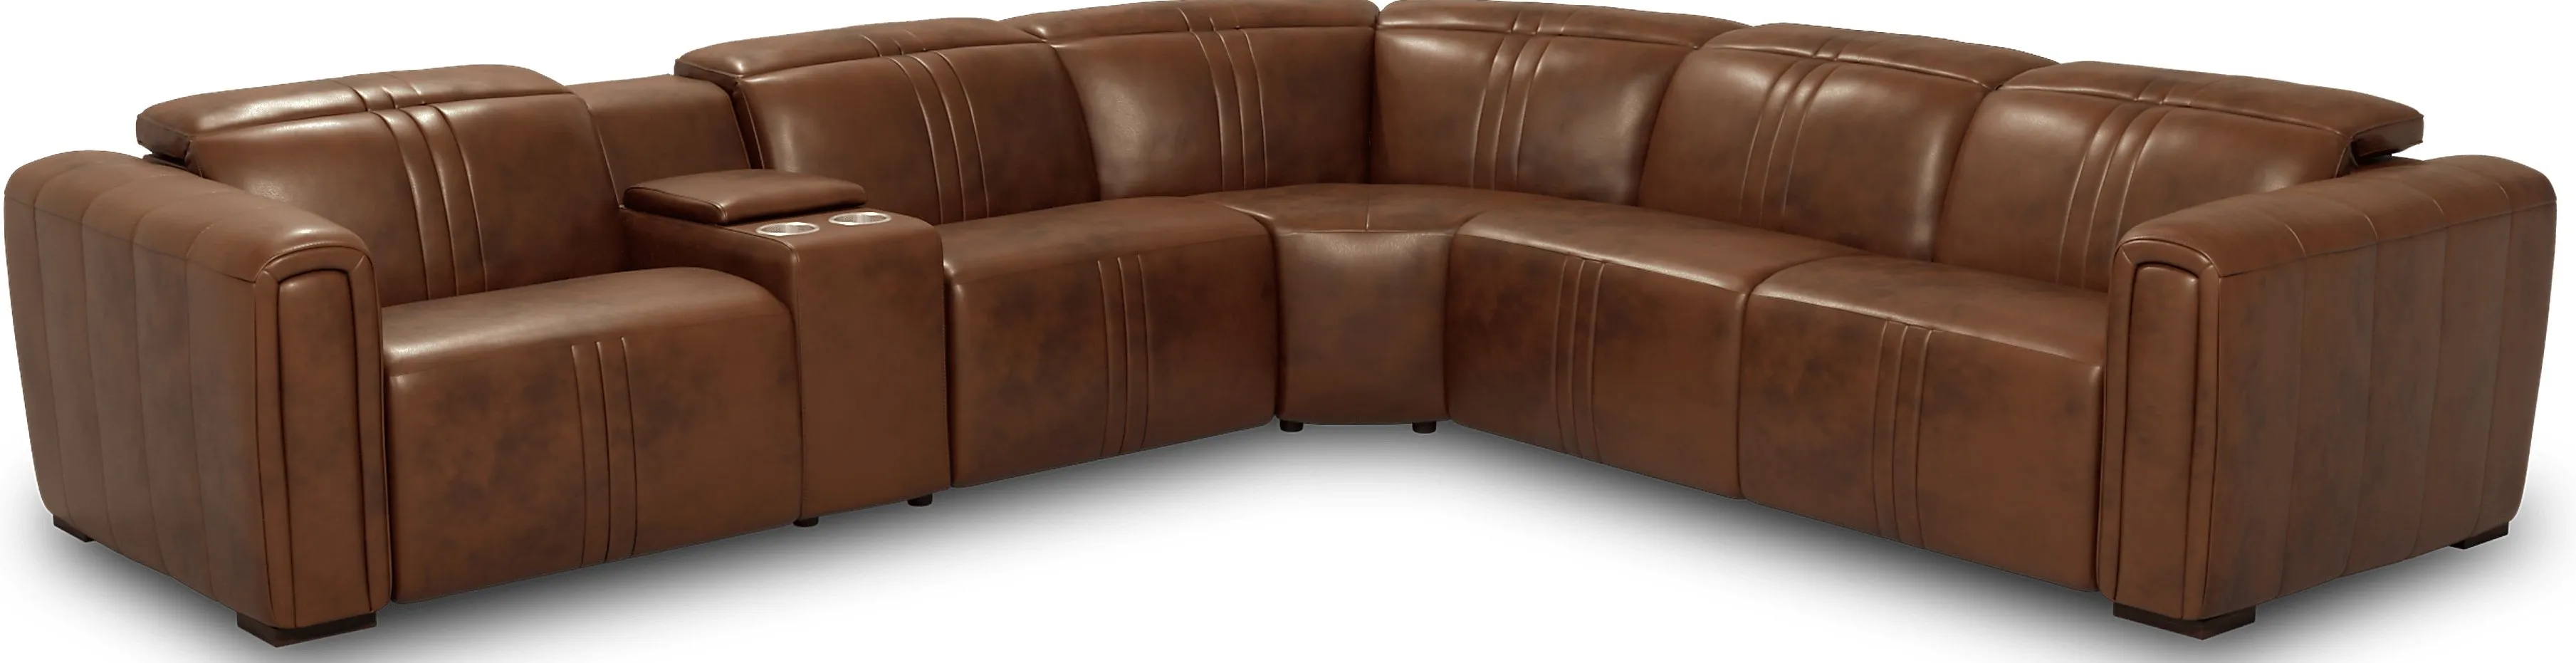 Bennett Valley Brown 6 Pc Leather Dual Power Reclining Sectional